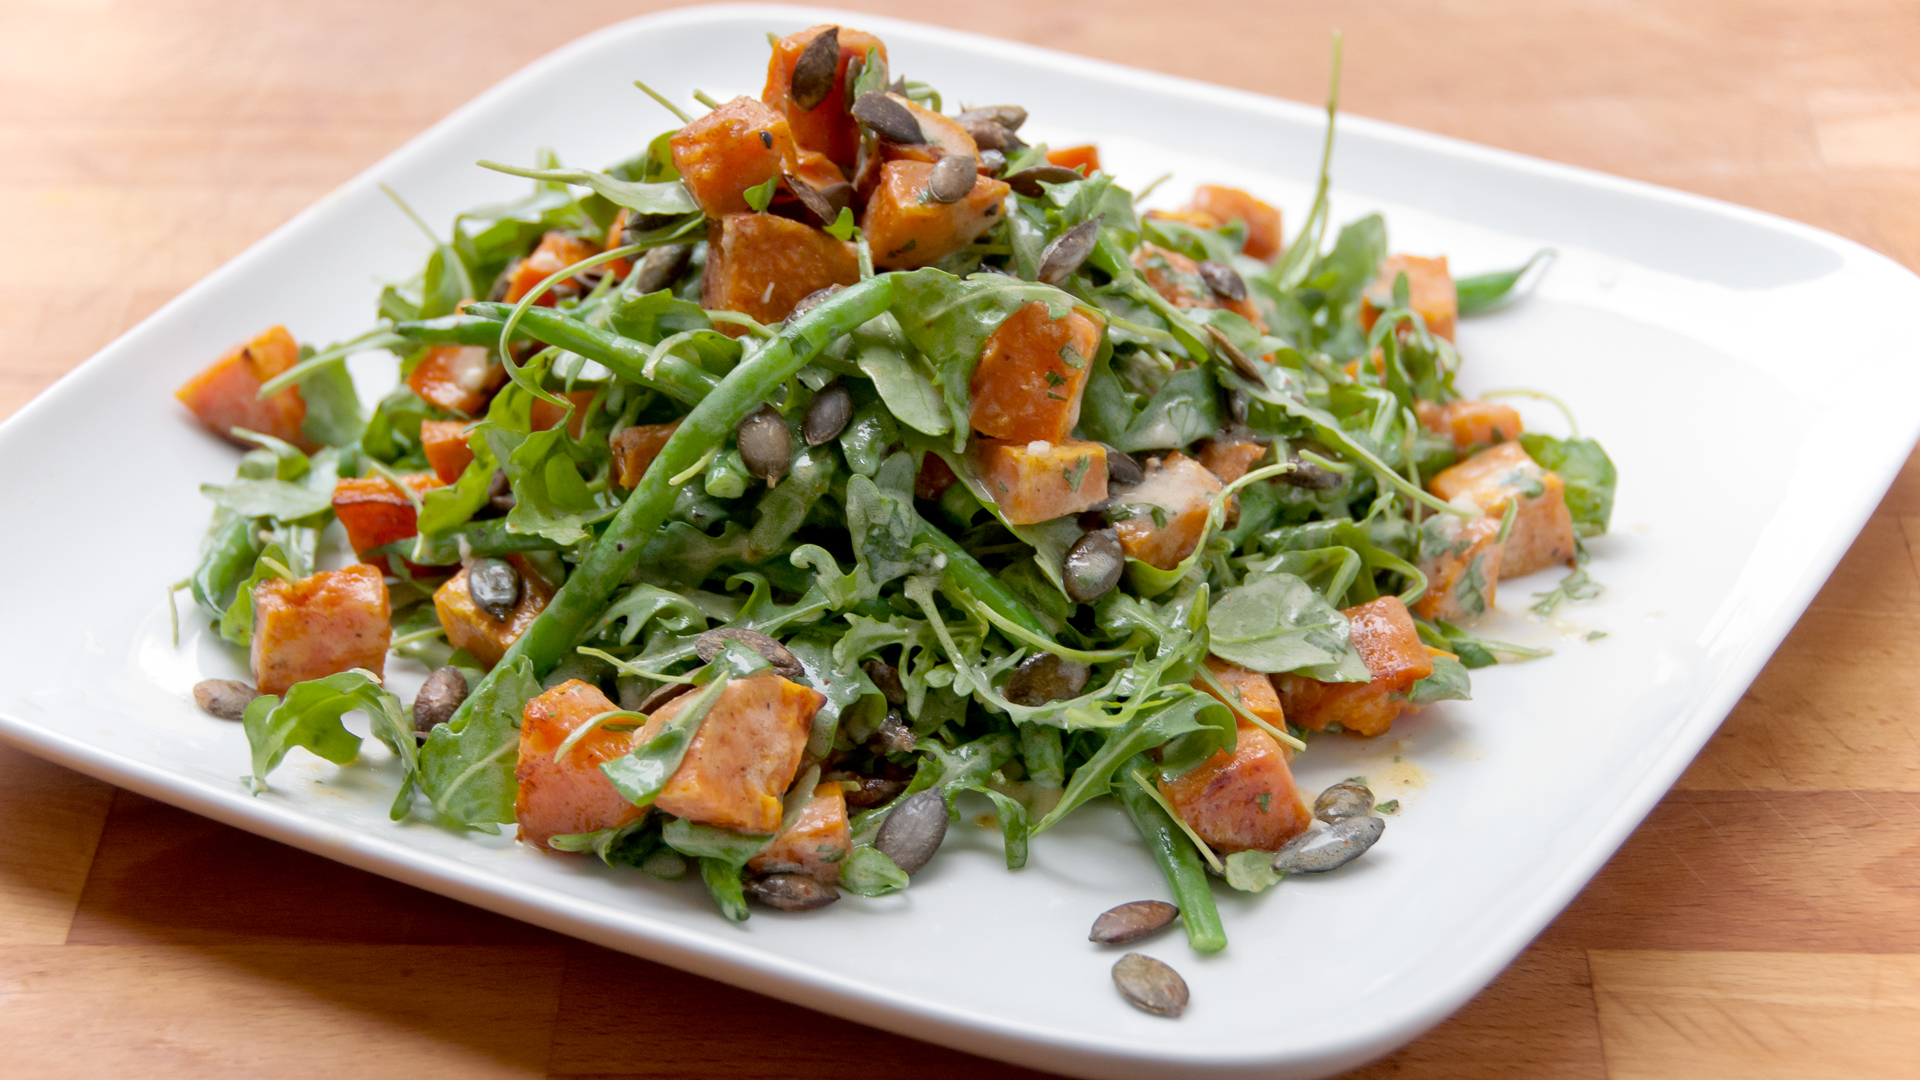 Carlin Greenstein's recipe for her arugula salad of sweet potatoes and haricot verts